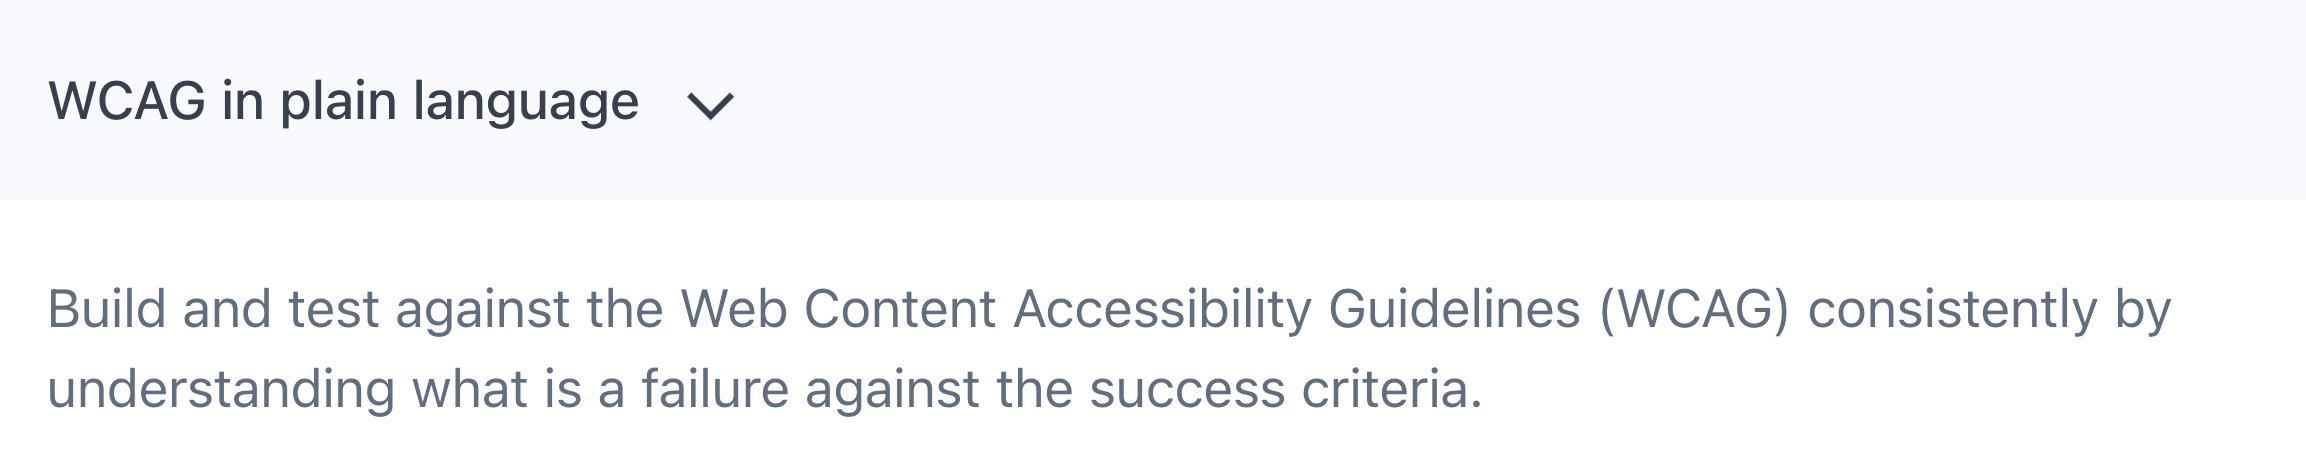 WCAG in plain language – 	  Build and test against the Web Content Accessibility Guidelines (WCAG) consistently by understanding what is a failure against the success criteria.